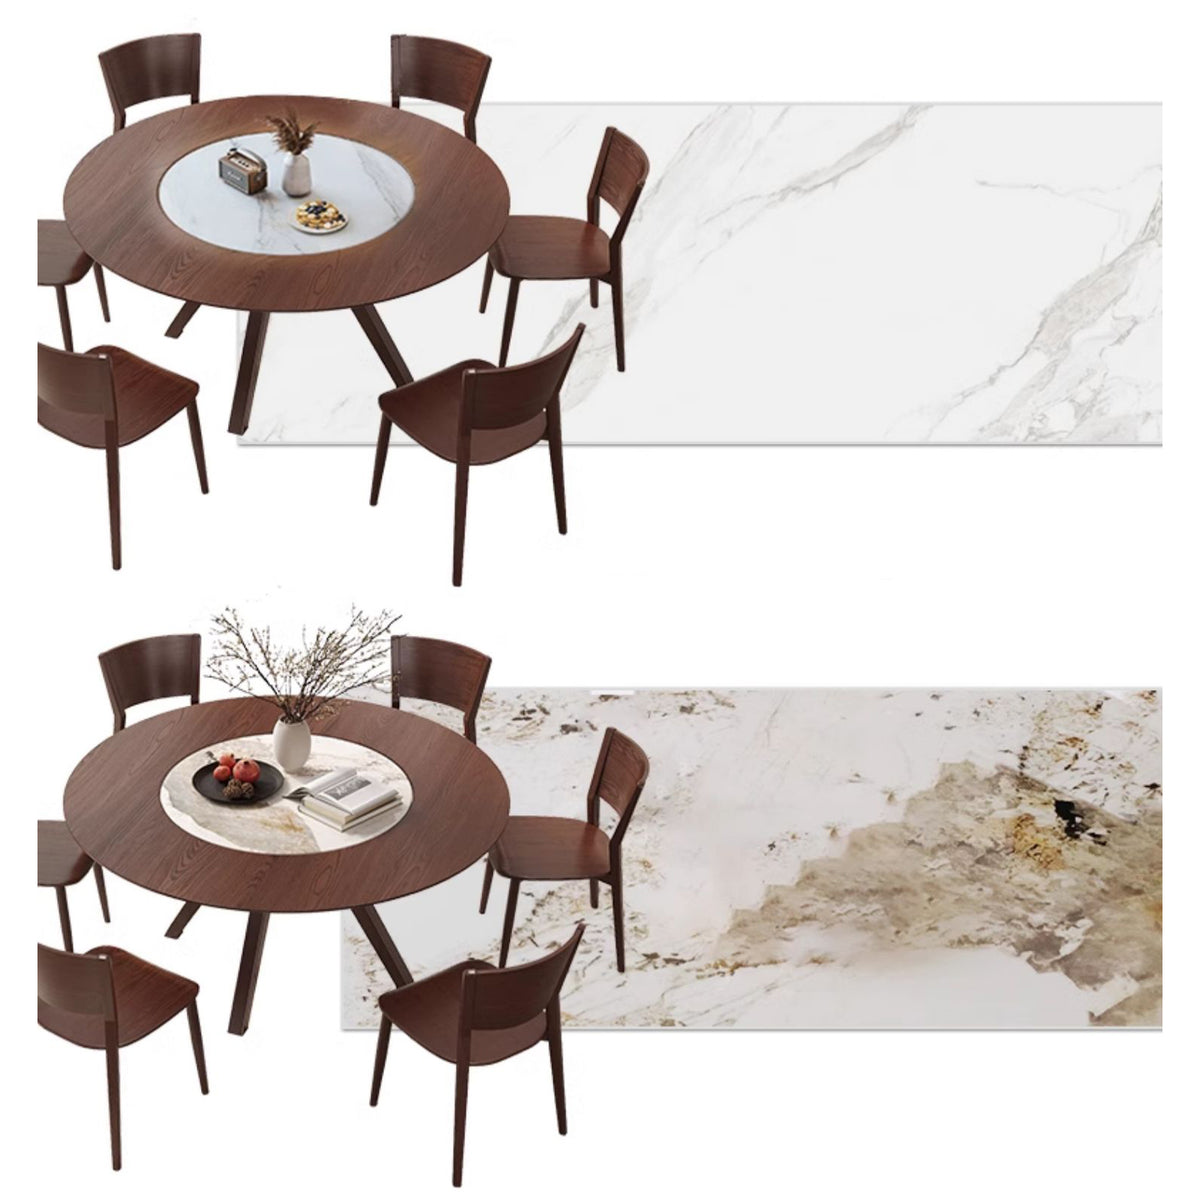 Elegant Glossy White Sintered Stone Table with Premium Ash Wood Base fmbs-005